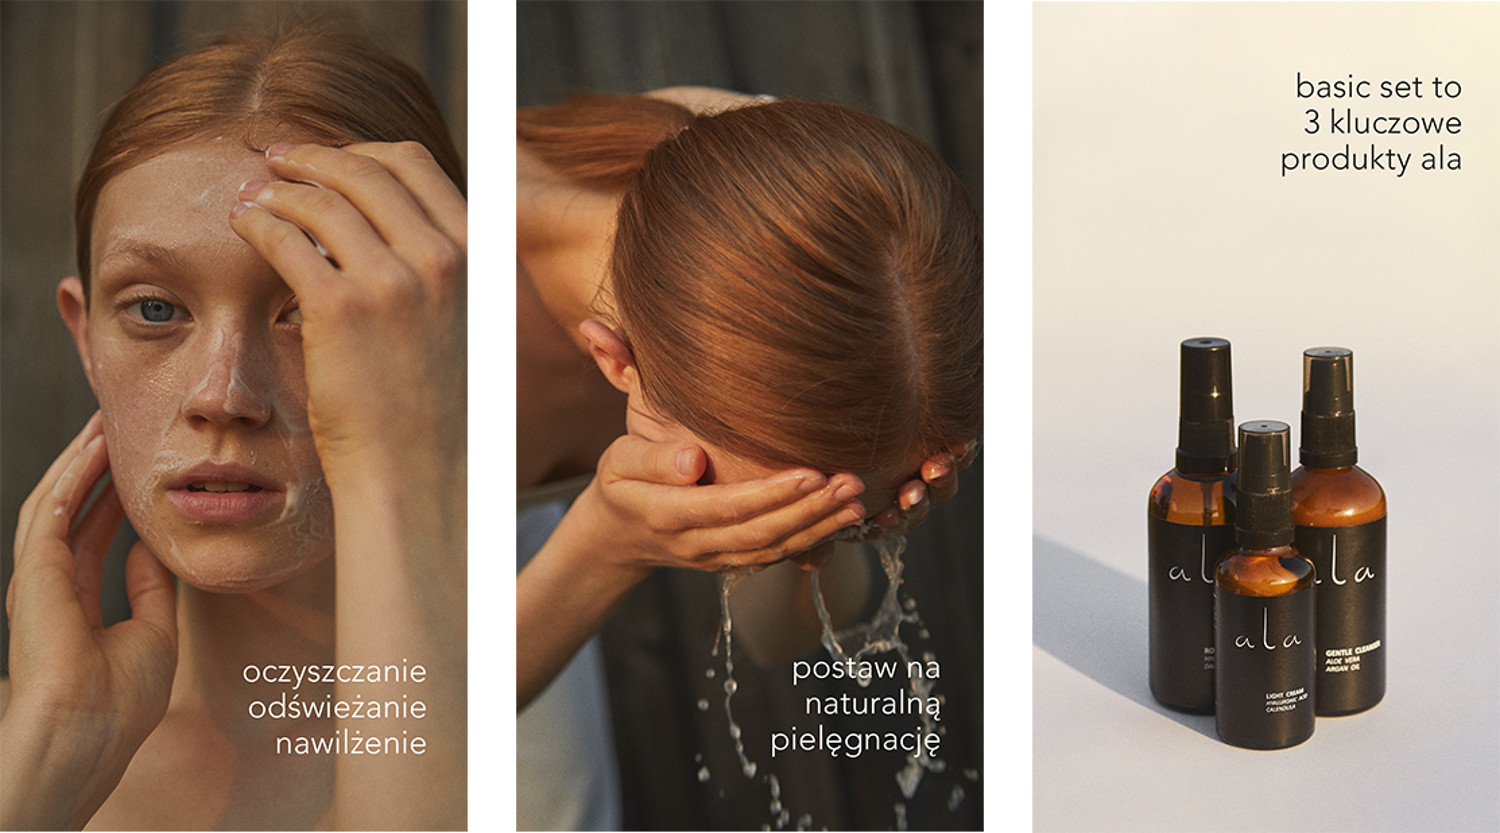 Subko&co client, Ala's basic set product campaign with a girl washing her face and applying a cream 